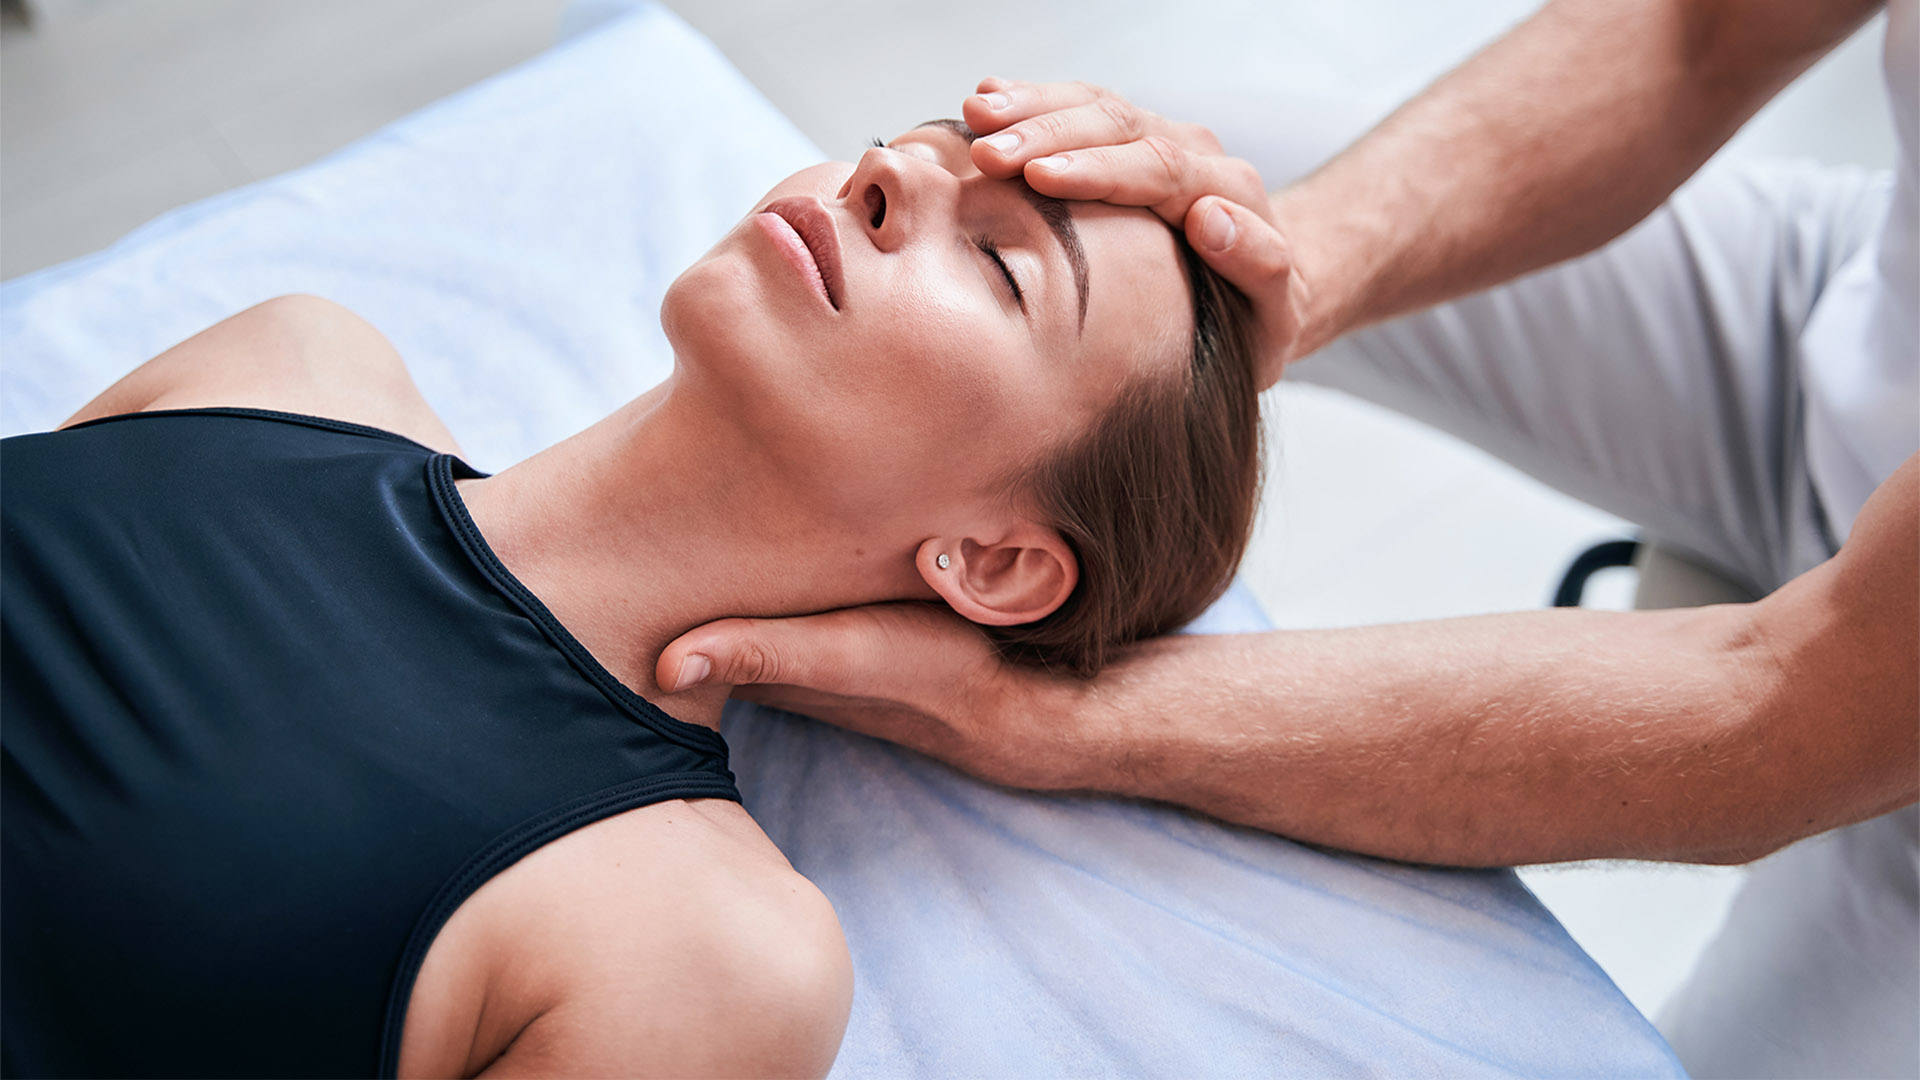 https://portlandwellnesscare.com/wp-content/uploads/2022/08/is-physiotherapy-good-for-neck-pain.jpg